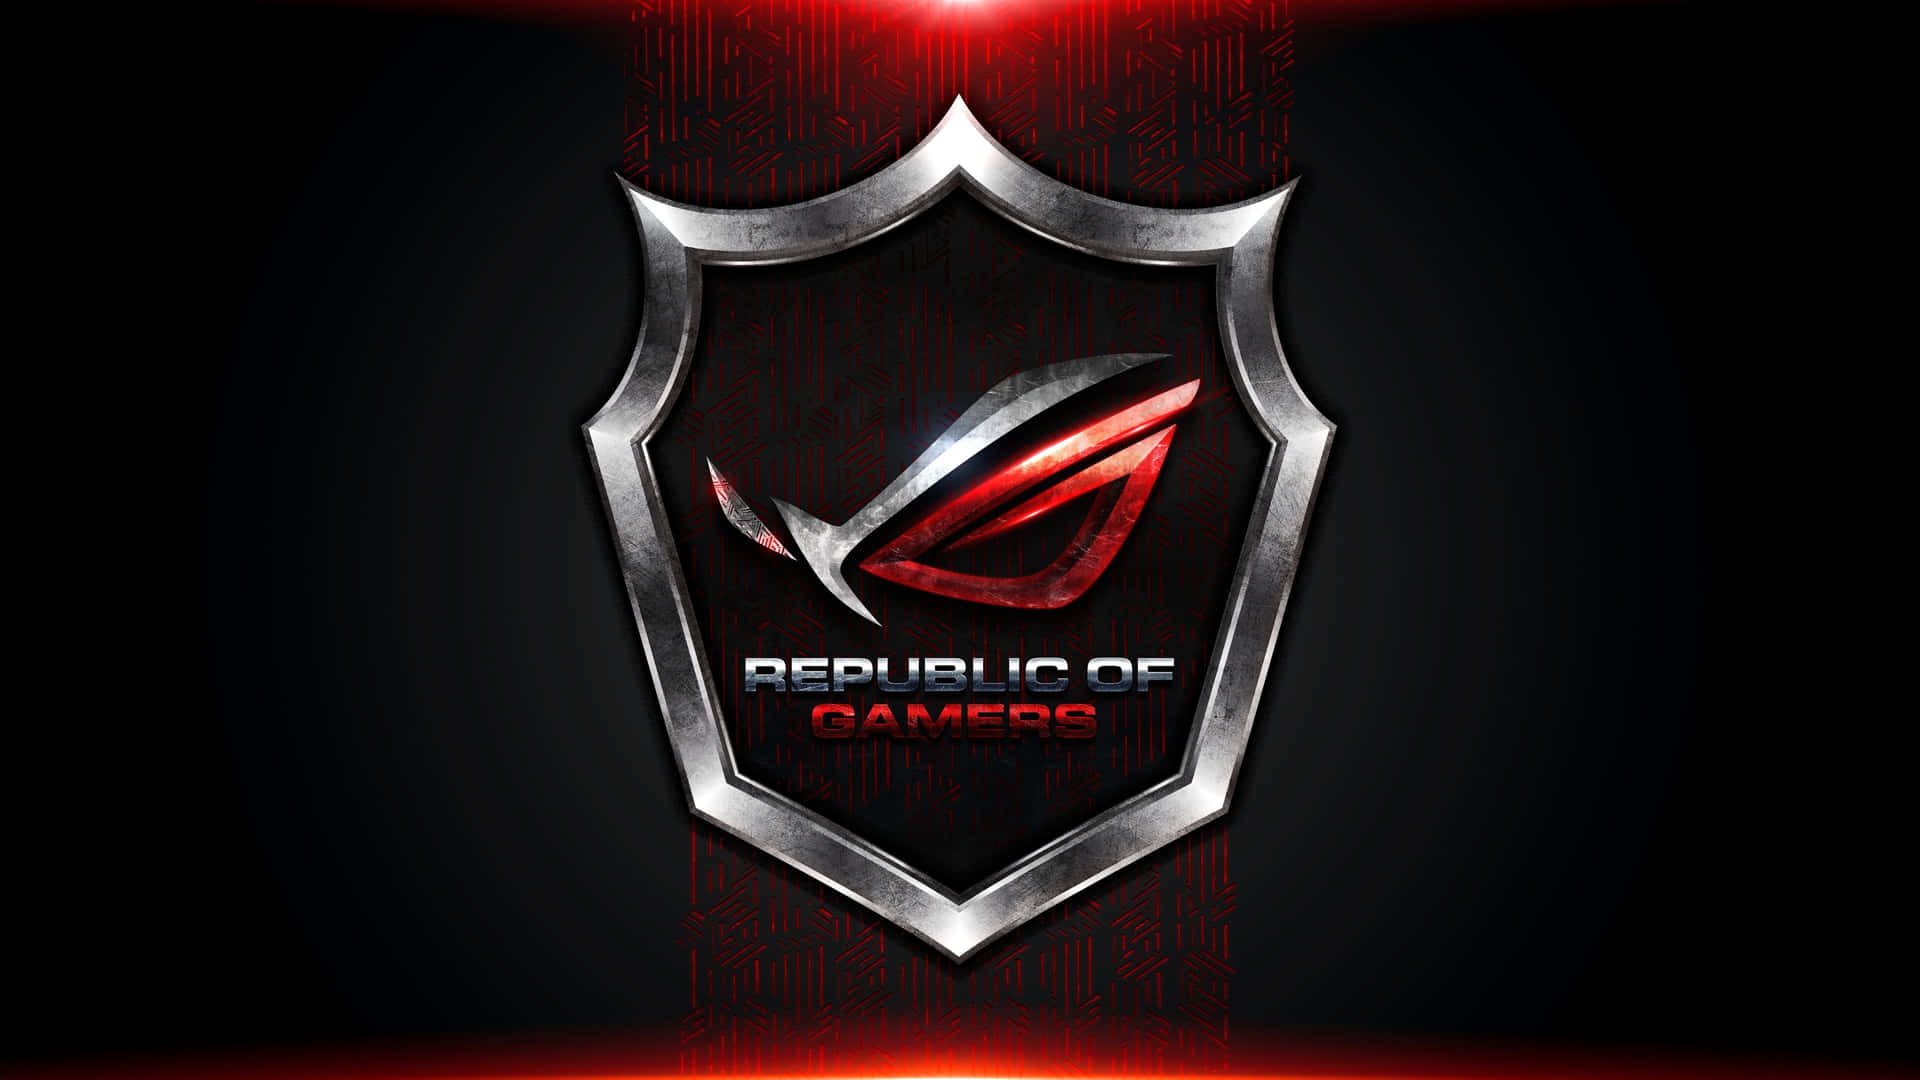 Welcome to the World of ASUS ROG